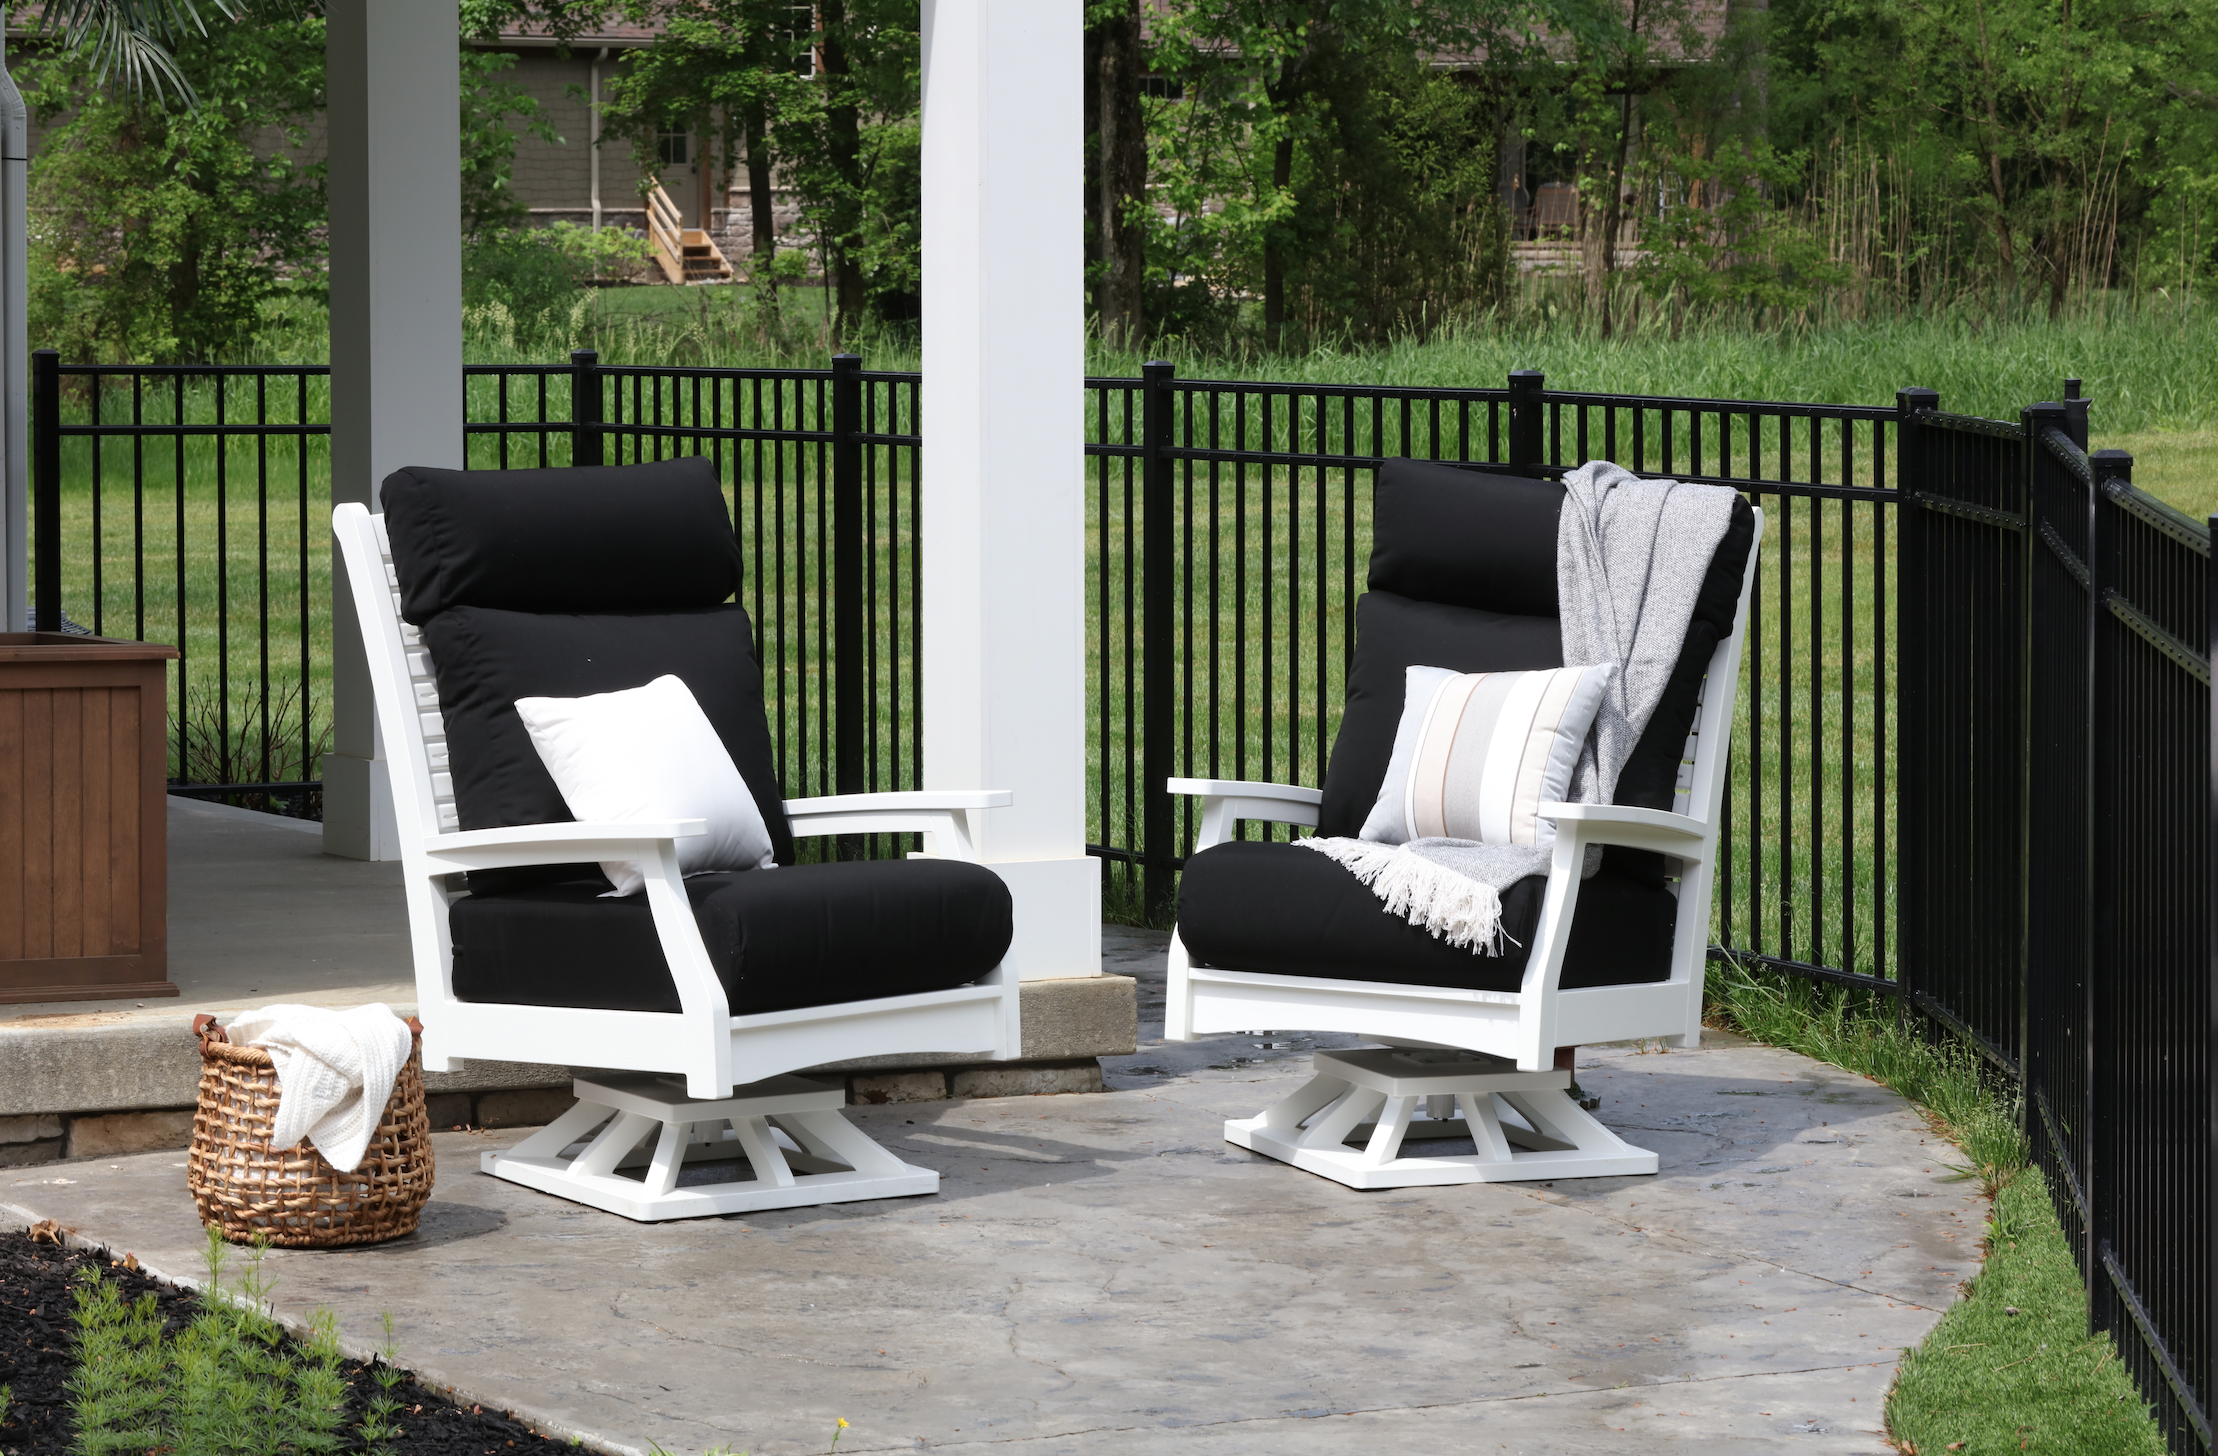  Classic Terrace High Back Swivel Rockers in White. Cushions in Canvas Black. Pillows in Expand Dove and Canvas Natural 